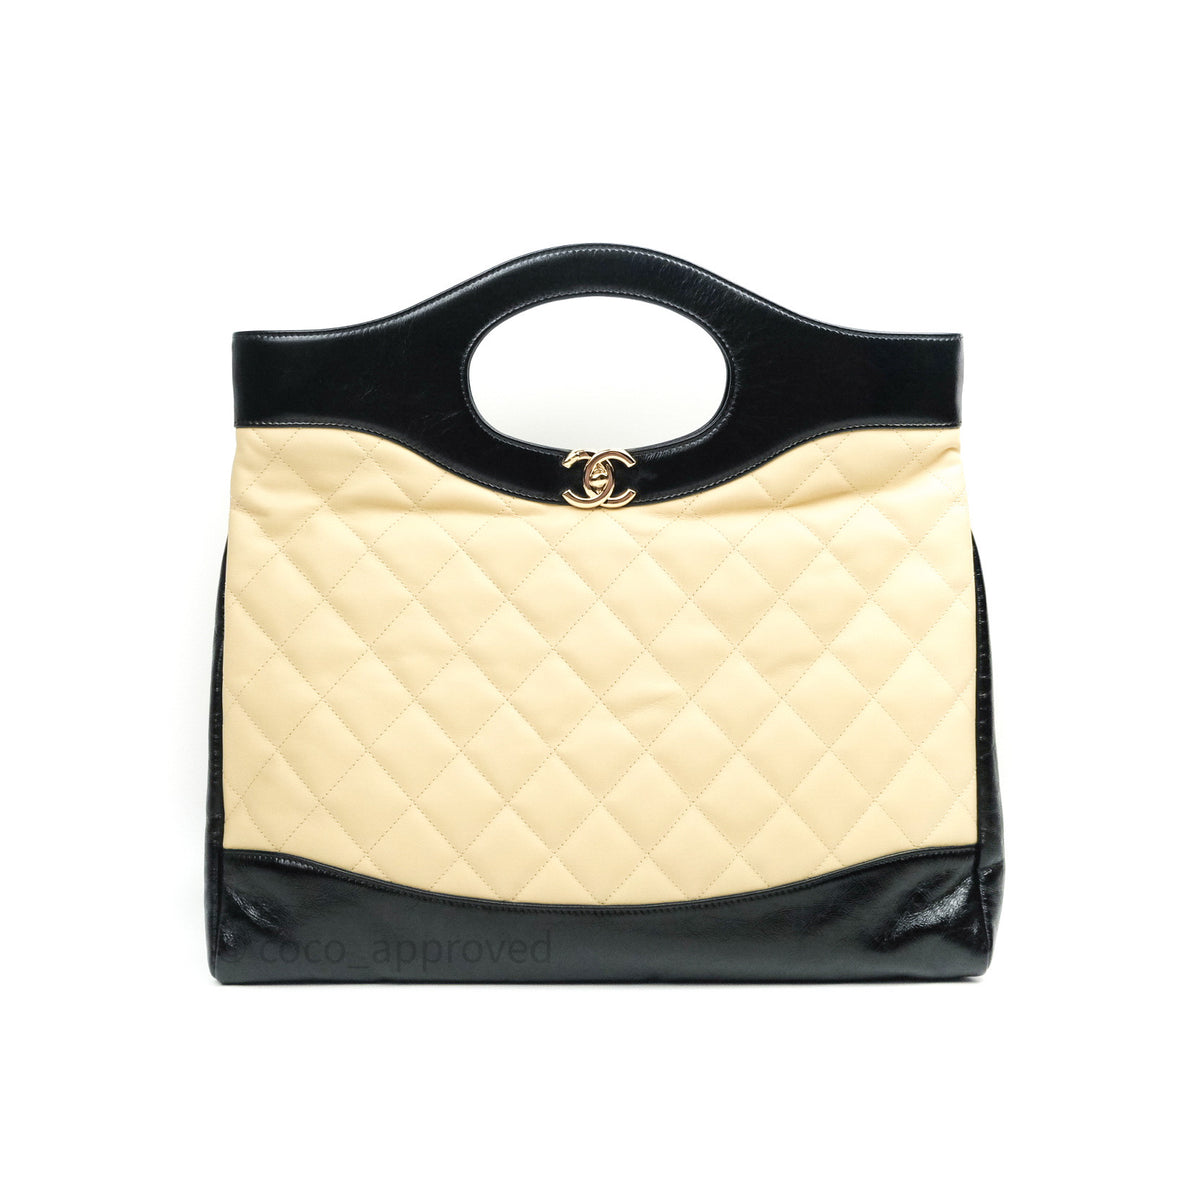 Chanel Aged Calfskin Quilted Large 31 Shopping Bag Beige Black